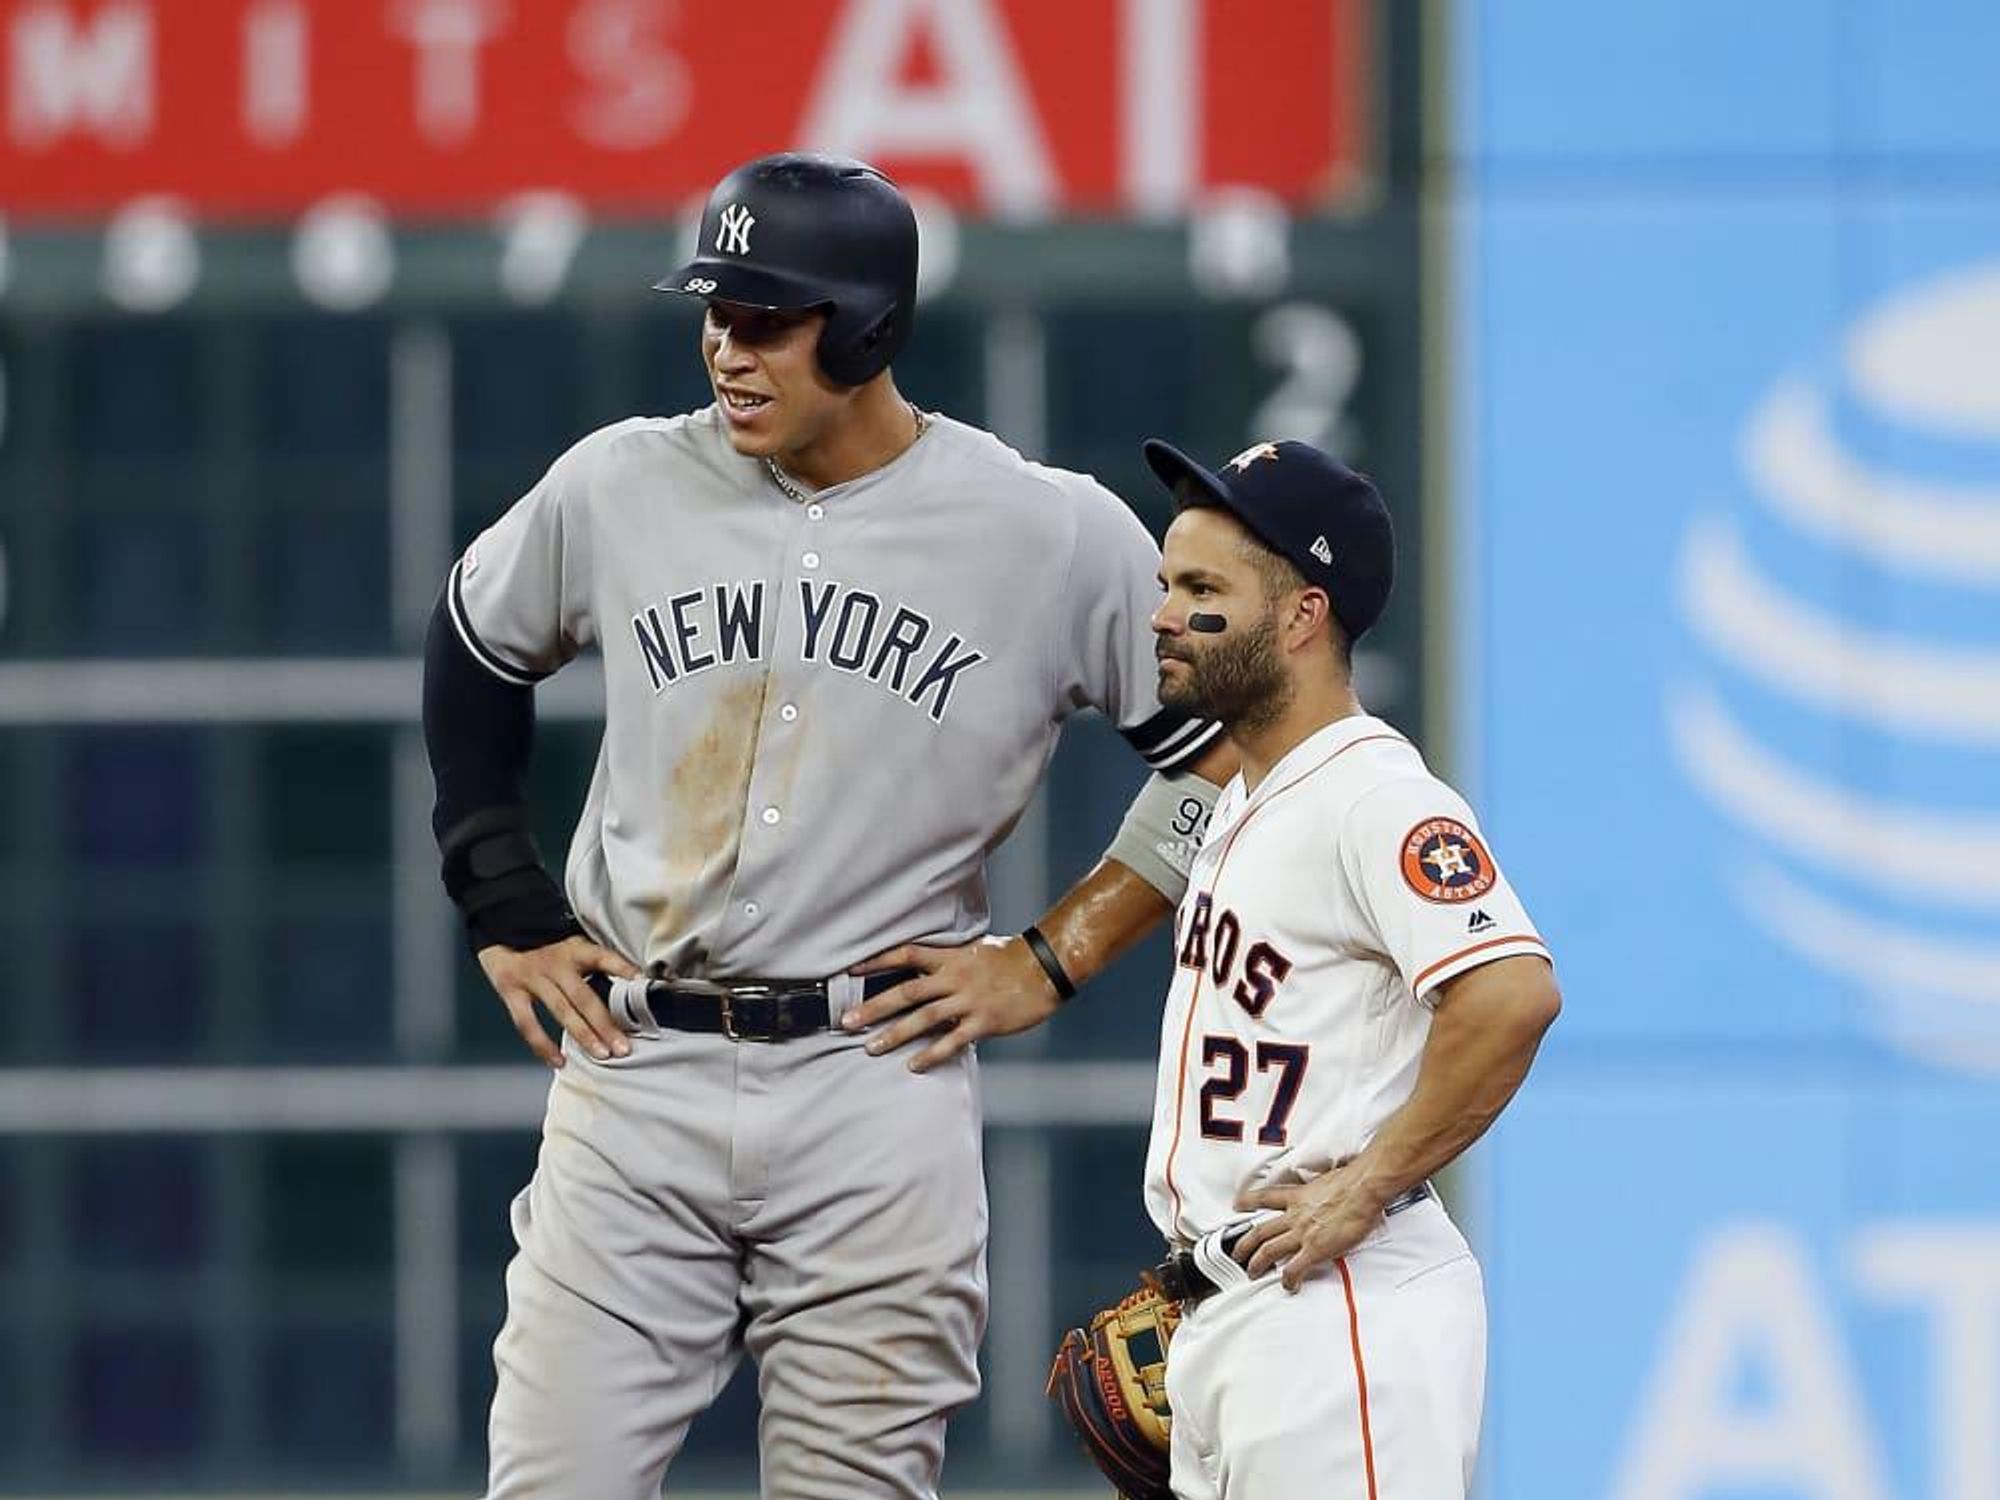 Ken Hoffman on why announcers should stop mentioning Jose Altuve's